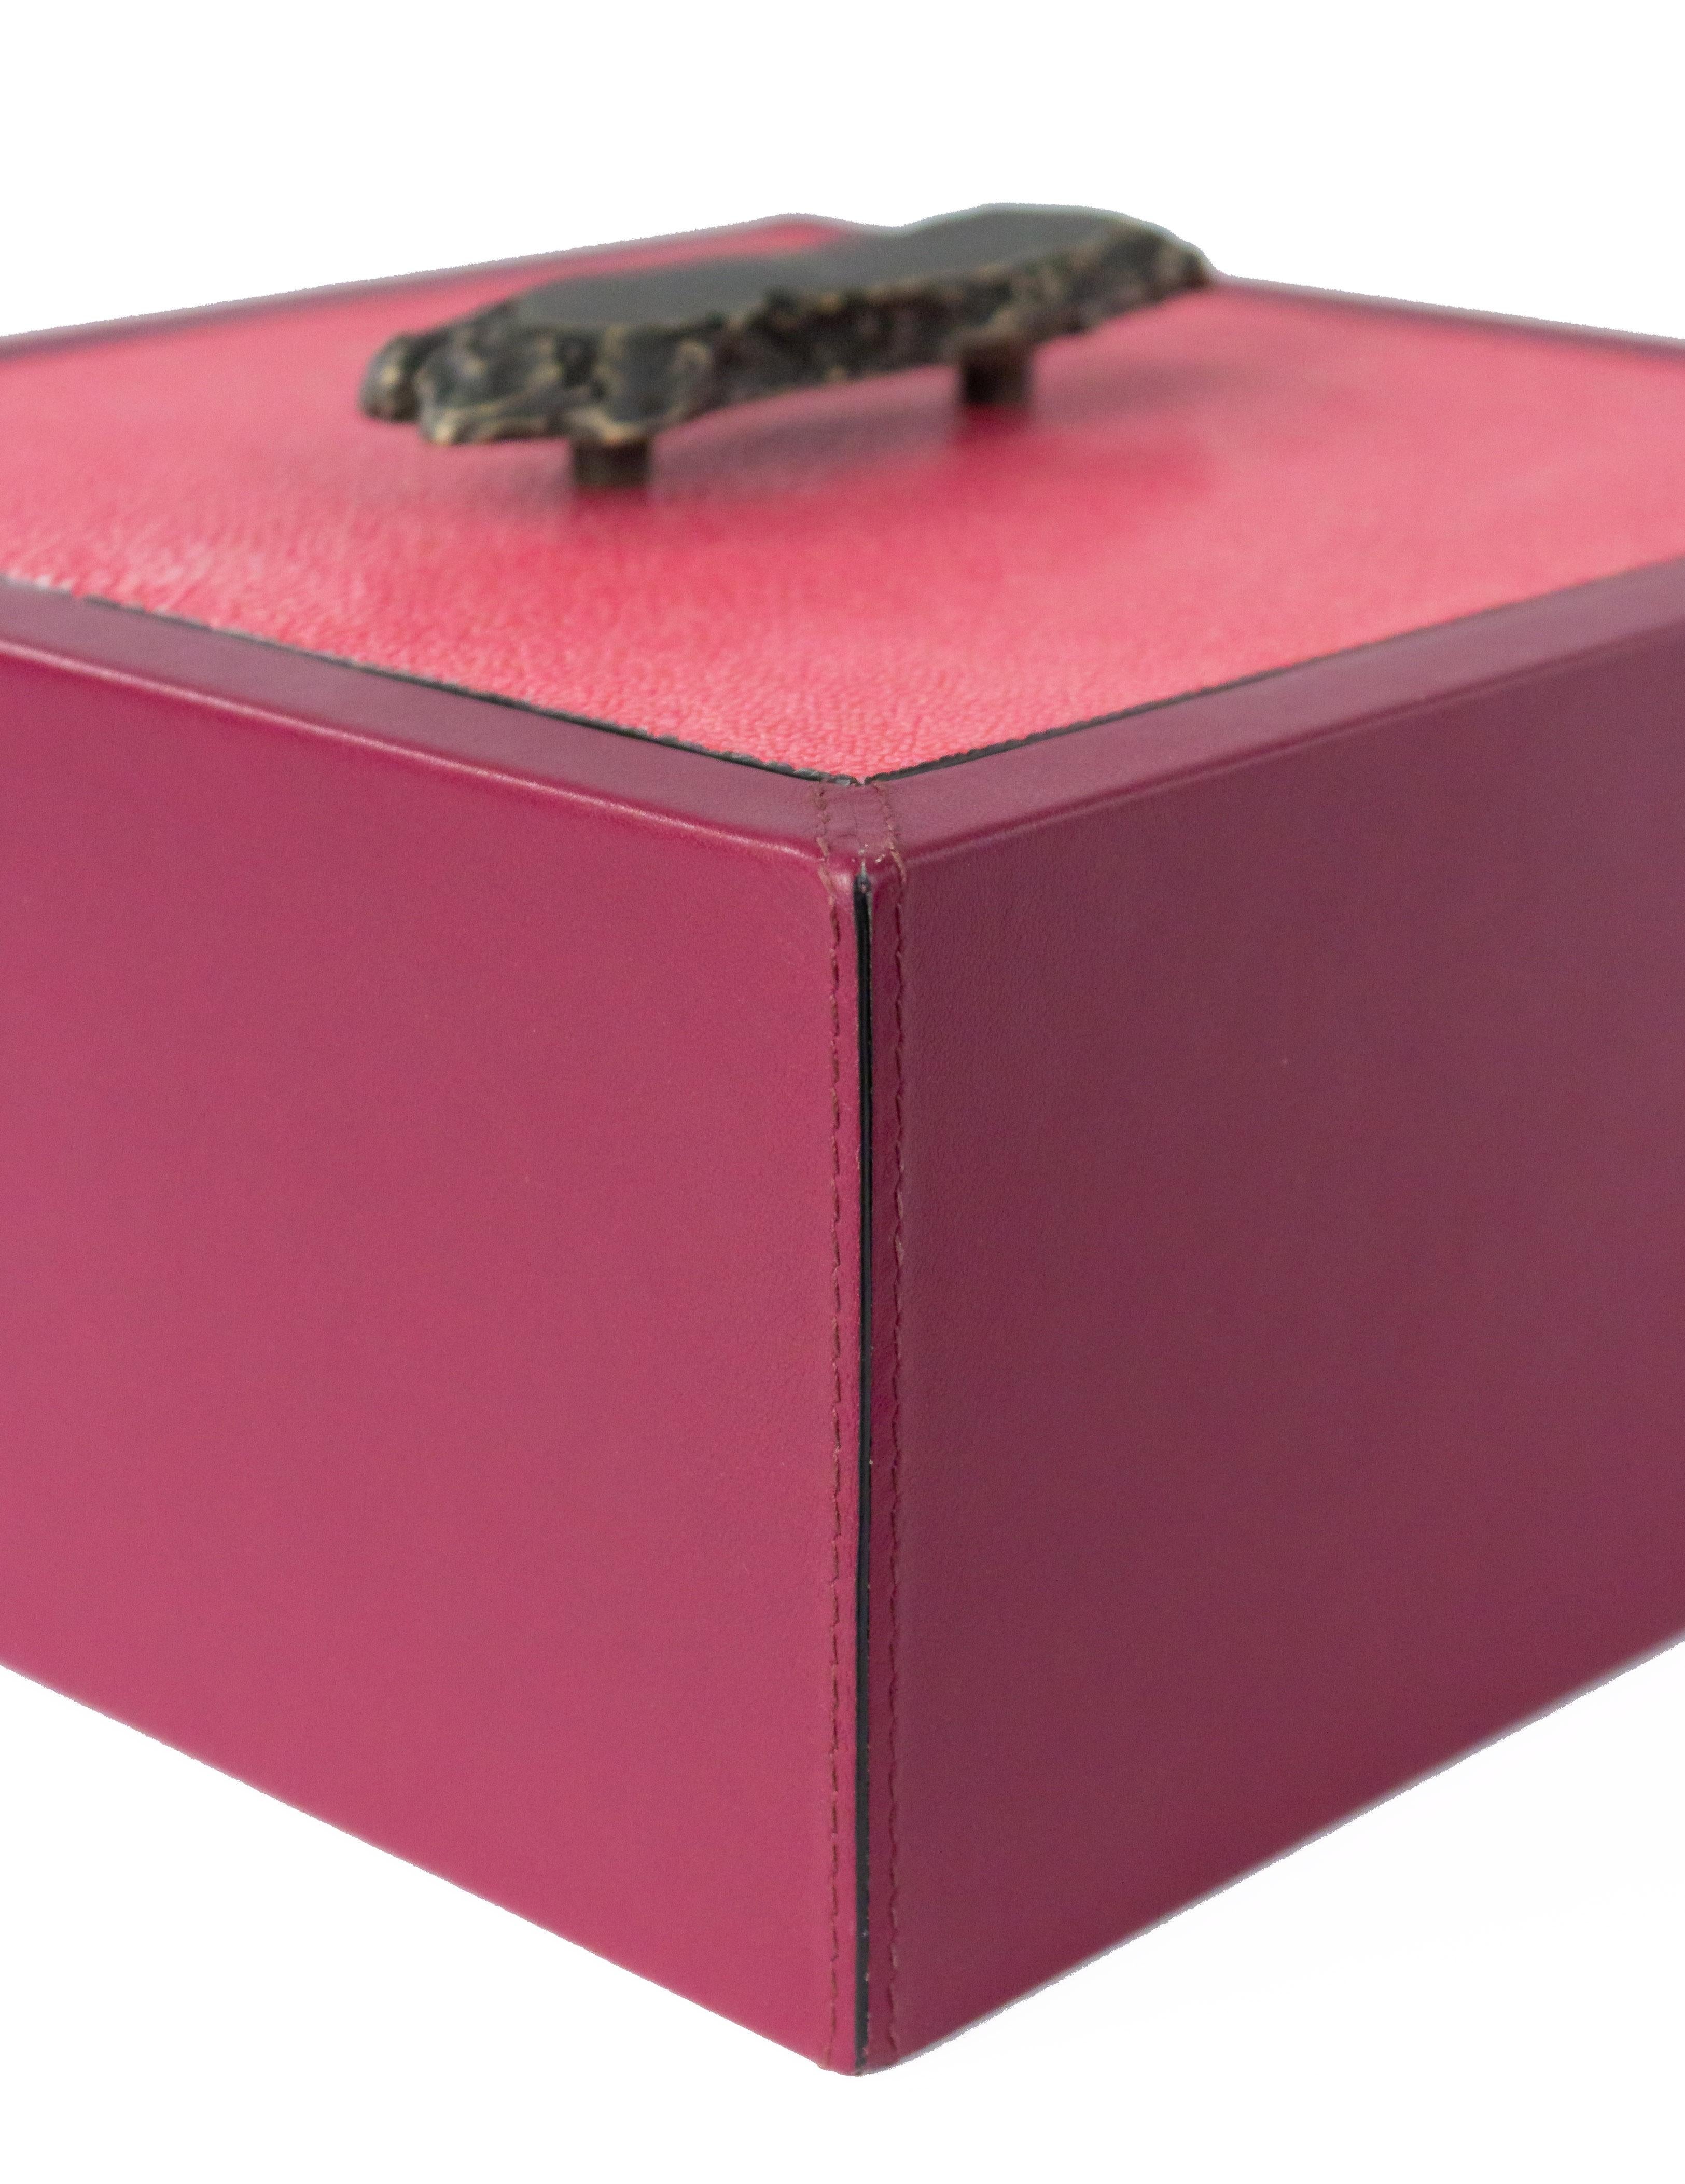 Contemporary Italian Pink Leather and Shagreen Box with Bronze Abstract Handle